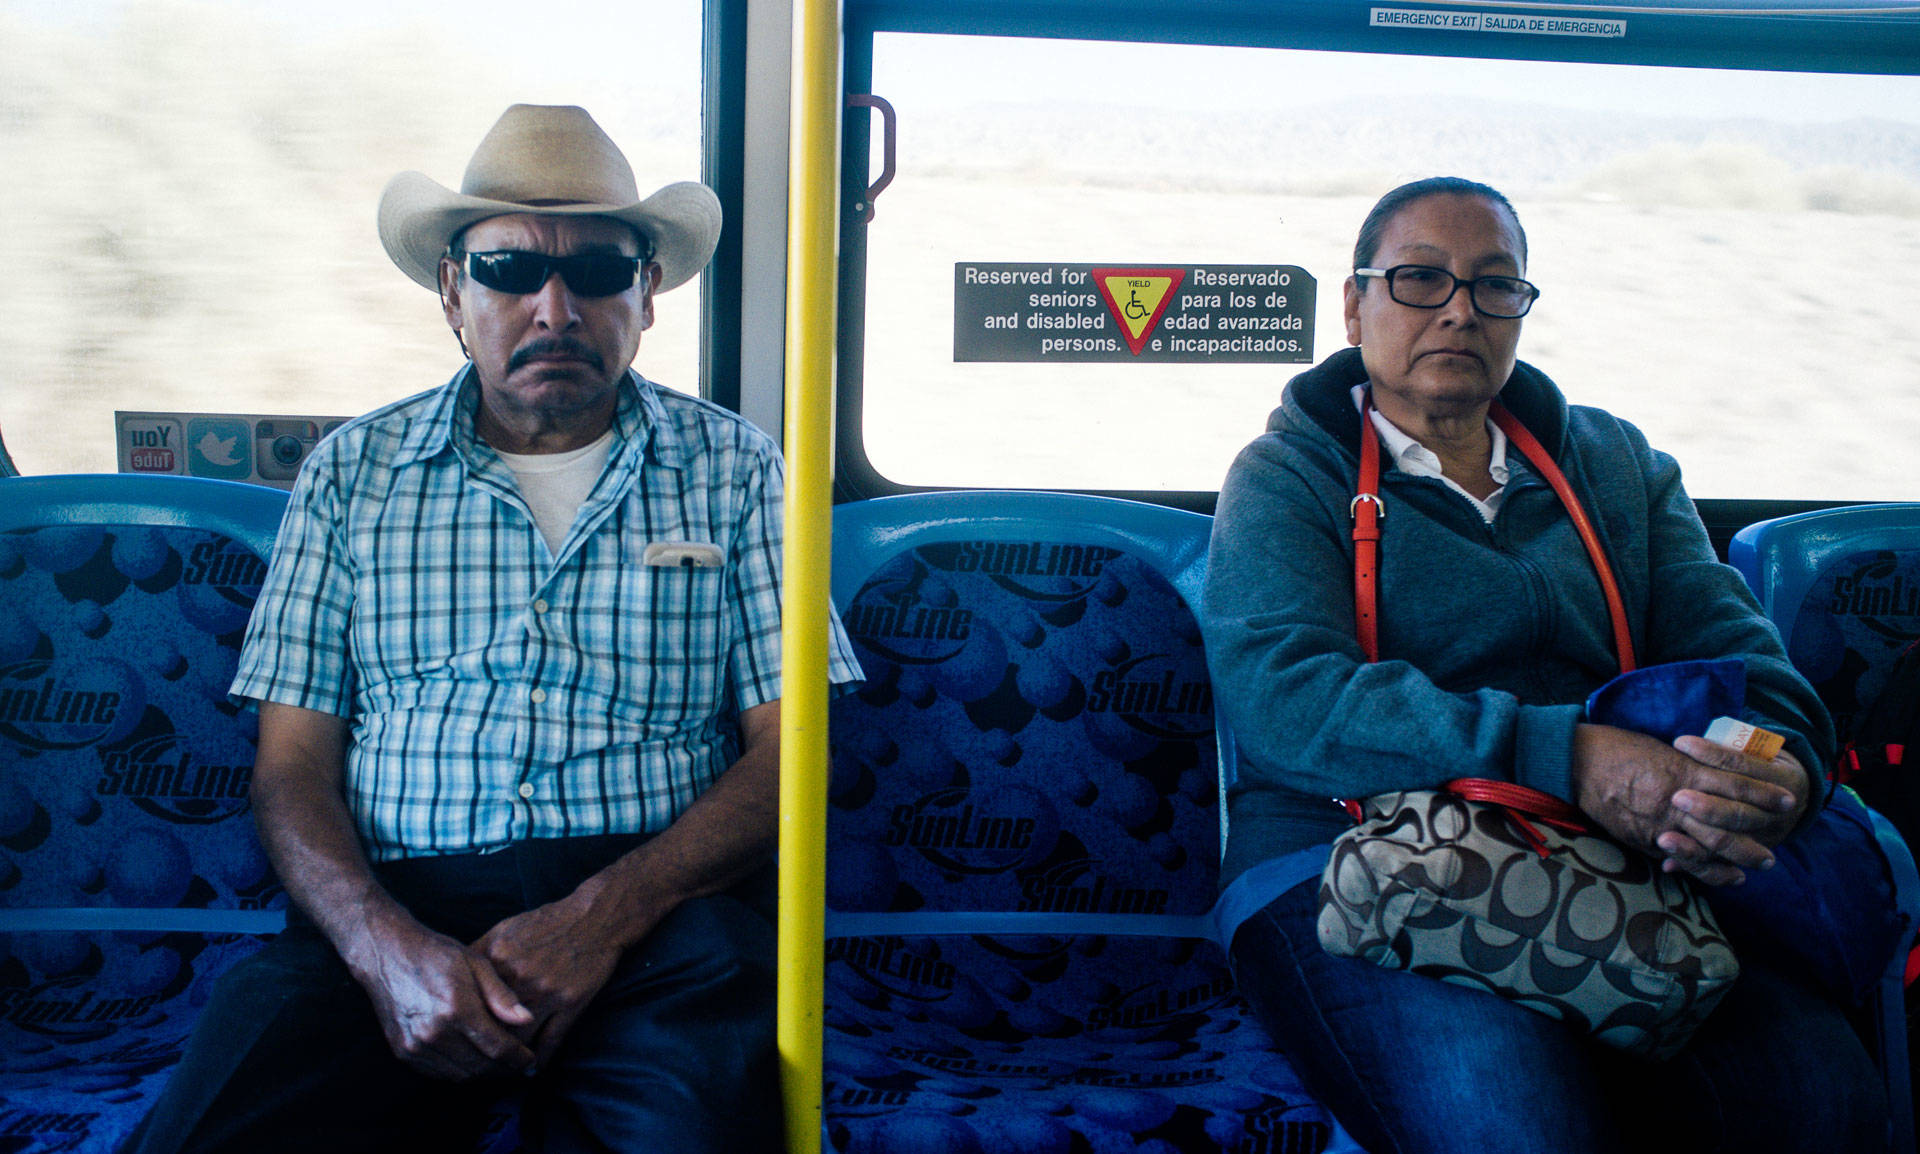 Jesus and Guillermina Mendez Casares take the bus every day for Jesus’ medical appointments, waking up at 4 a.m. so they have enough time to walk to the bus stop on the edge of town to catch the 5:20 a.m. bus. “When my husband first got sick in 2009, there was no bus service from North Shore at all to take us to the doctor,” says Guillermina. “Every three hours is not enough, but it’s better than nothing. We’re grateful for the service at all.” Bryan Mendez/Coachella Unincorporated